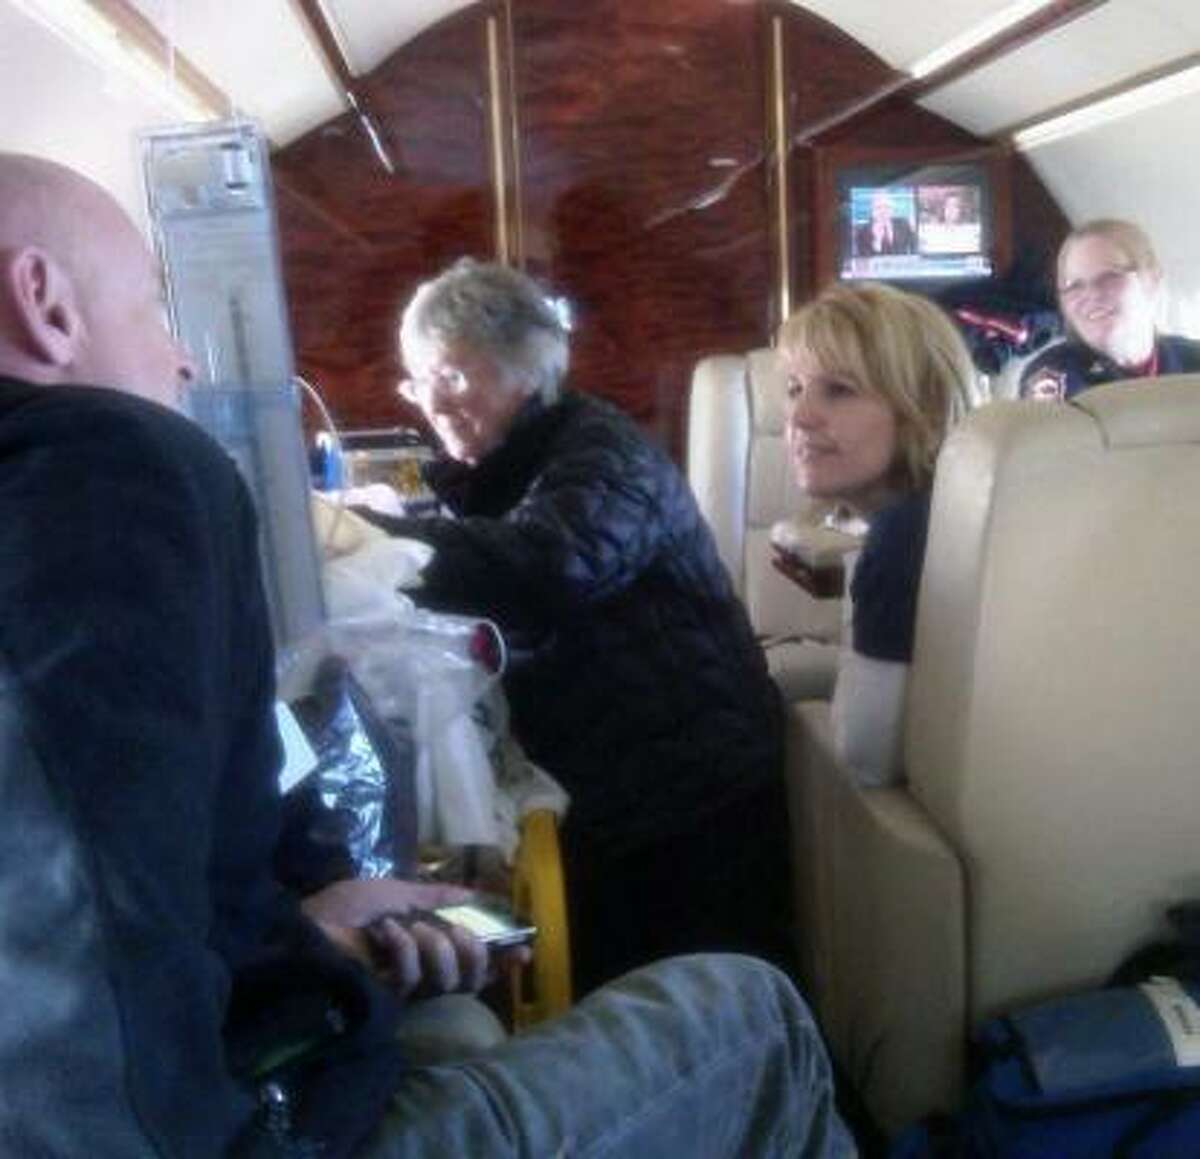 Gloria Giffords, mother of U.S. Rep. Gabrielle Giffords, attends to her Friday on the flight from Tucson to Houston. The congresswoman's husband, astronaut Mark Kelly, left, chats with one of Giffords' nurses, Tracy Culbert.